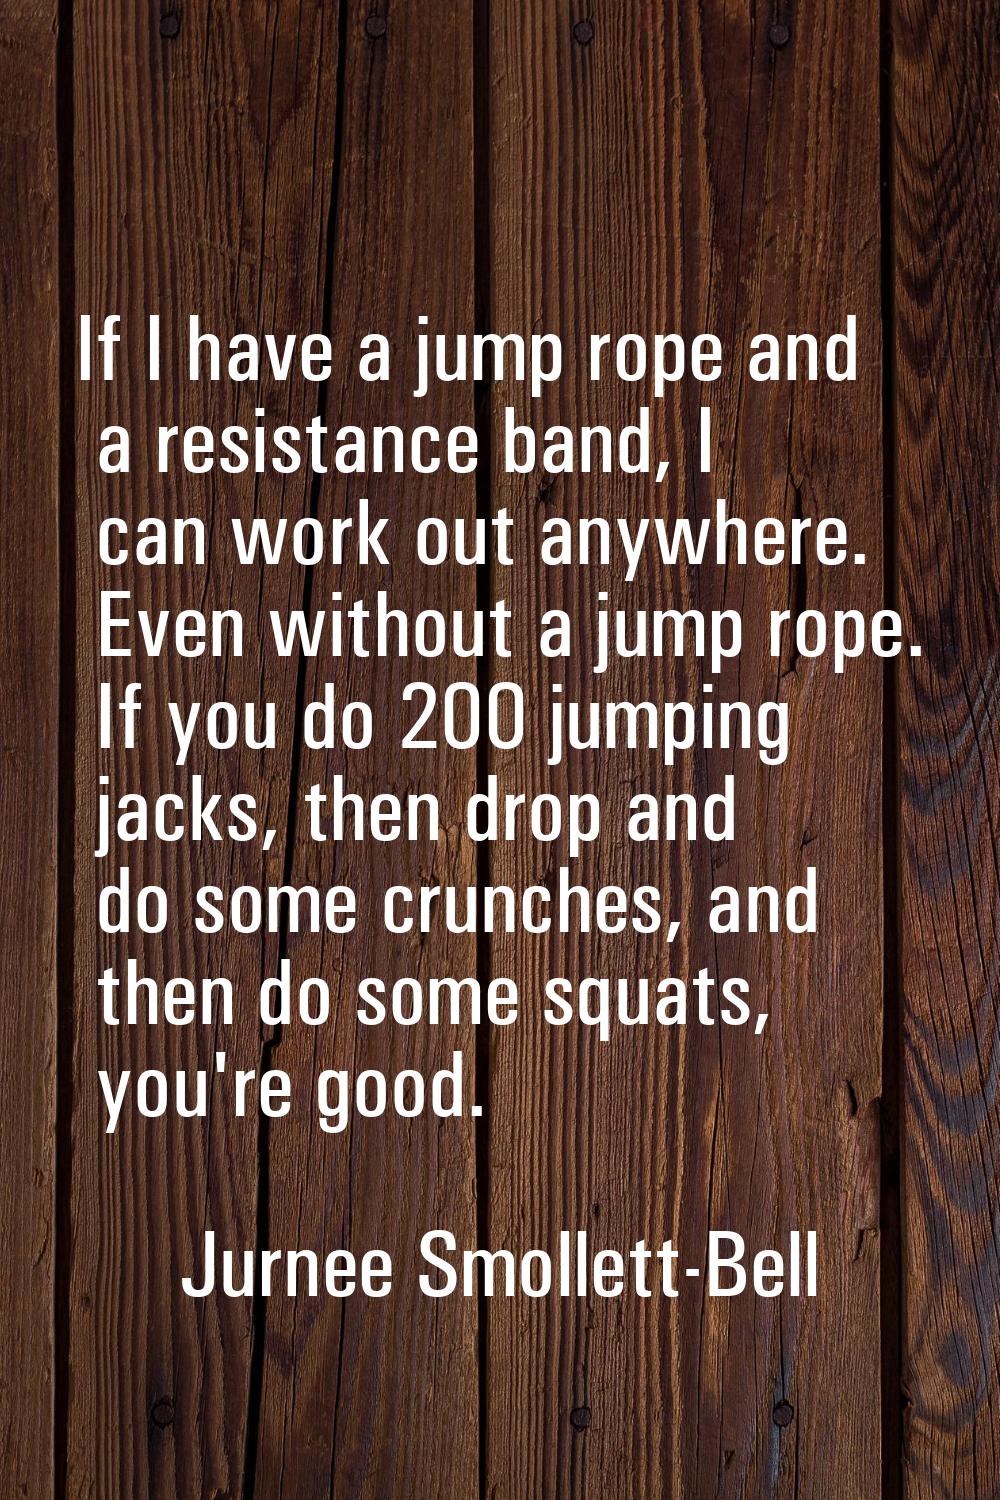 If I have a jump rope and a resistance band, I can work out anywhere. Even without a jump rope. If 